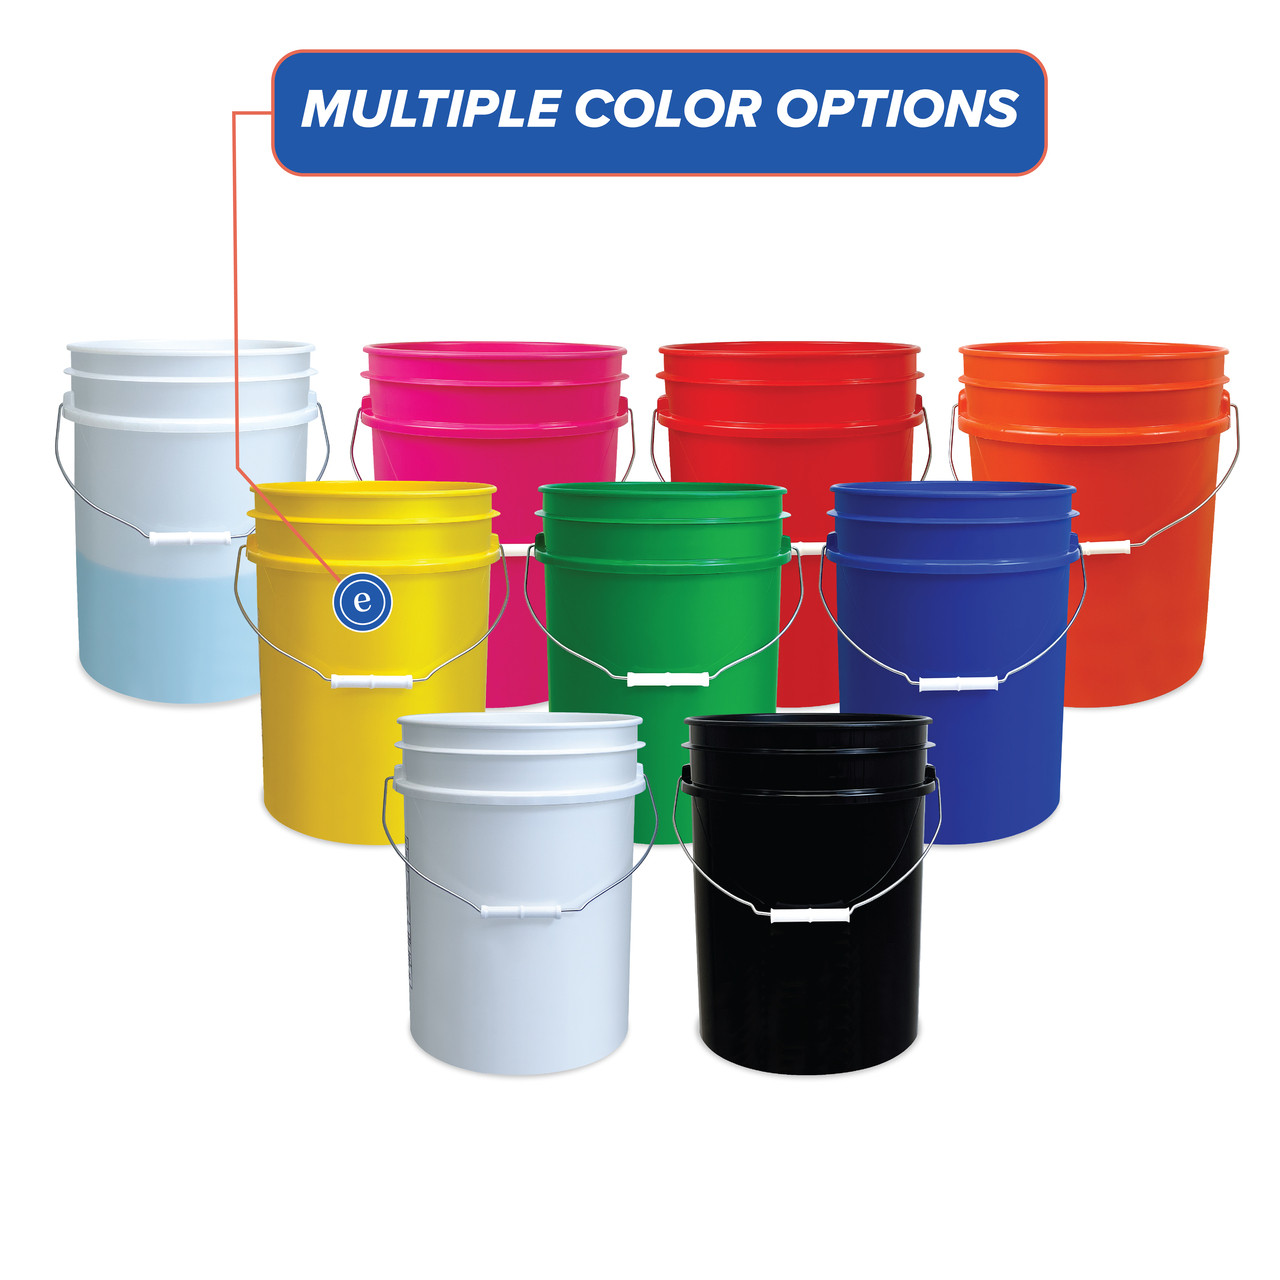 1 Pallet of (12) 5-Gallon Buckets of 10 Different BULK FOOD Storage Items